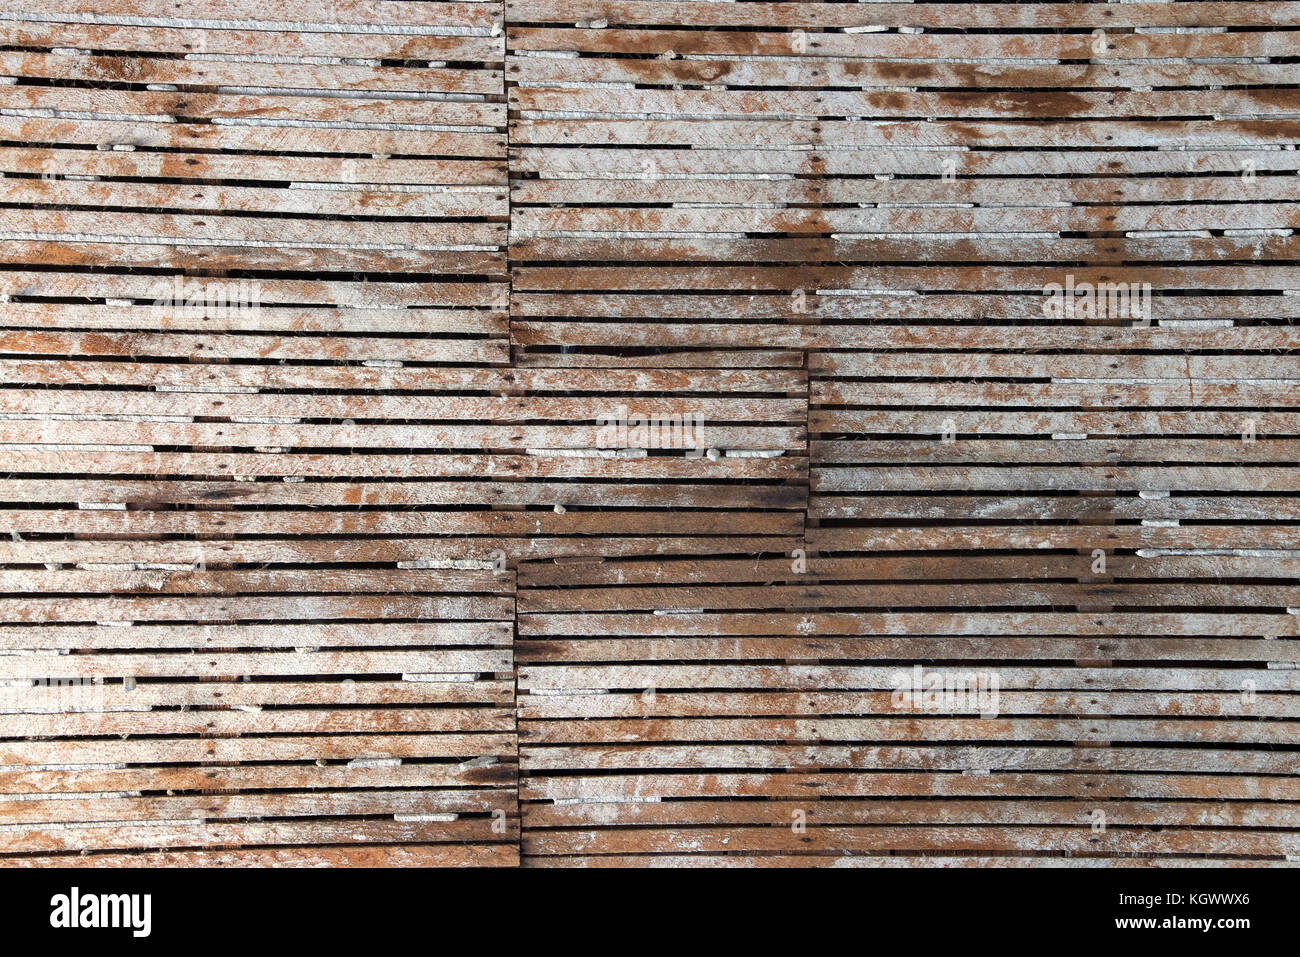 Wooden Slats Images – Browse 112,067 Stock Photos, Vectors, and